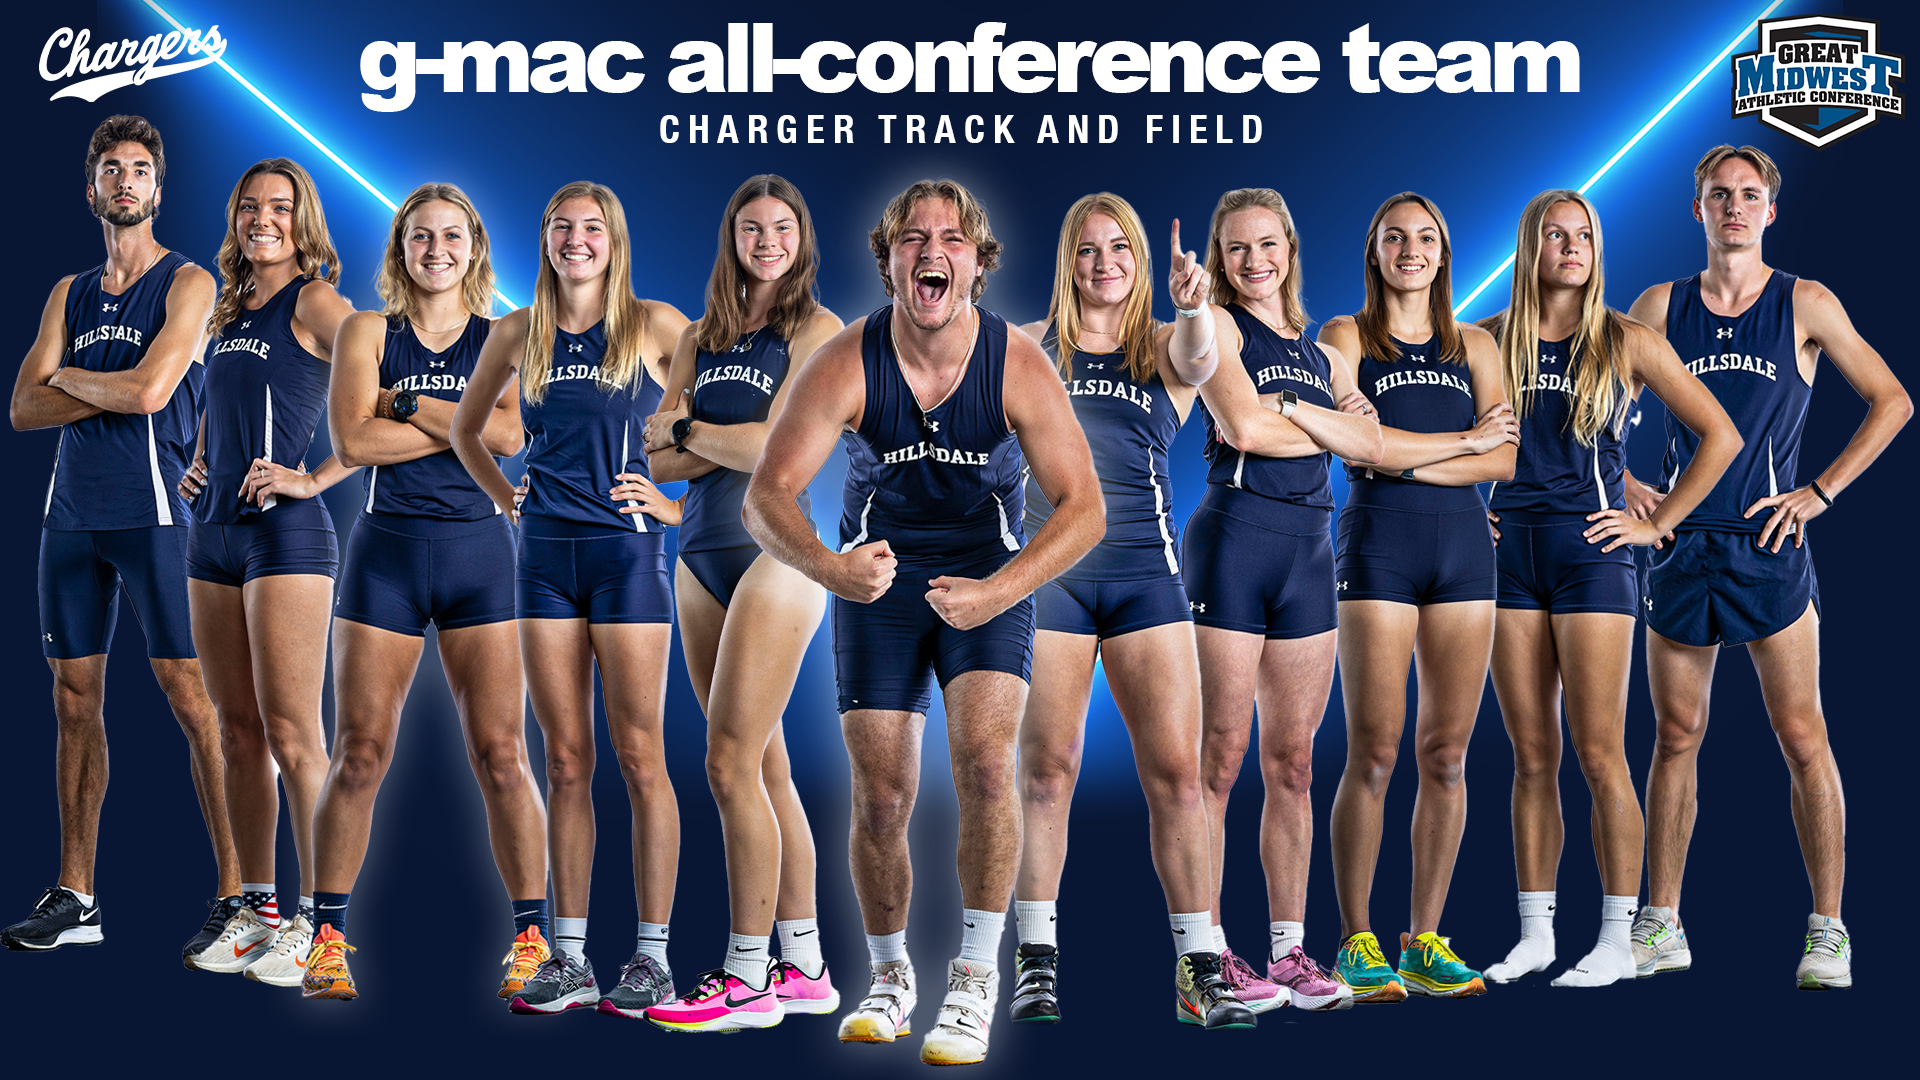 Eleven Charger athletes earn All-G-MAC honors for outdoor track and field